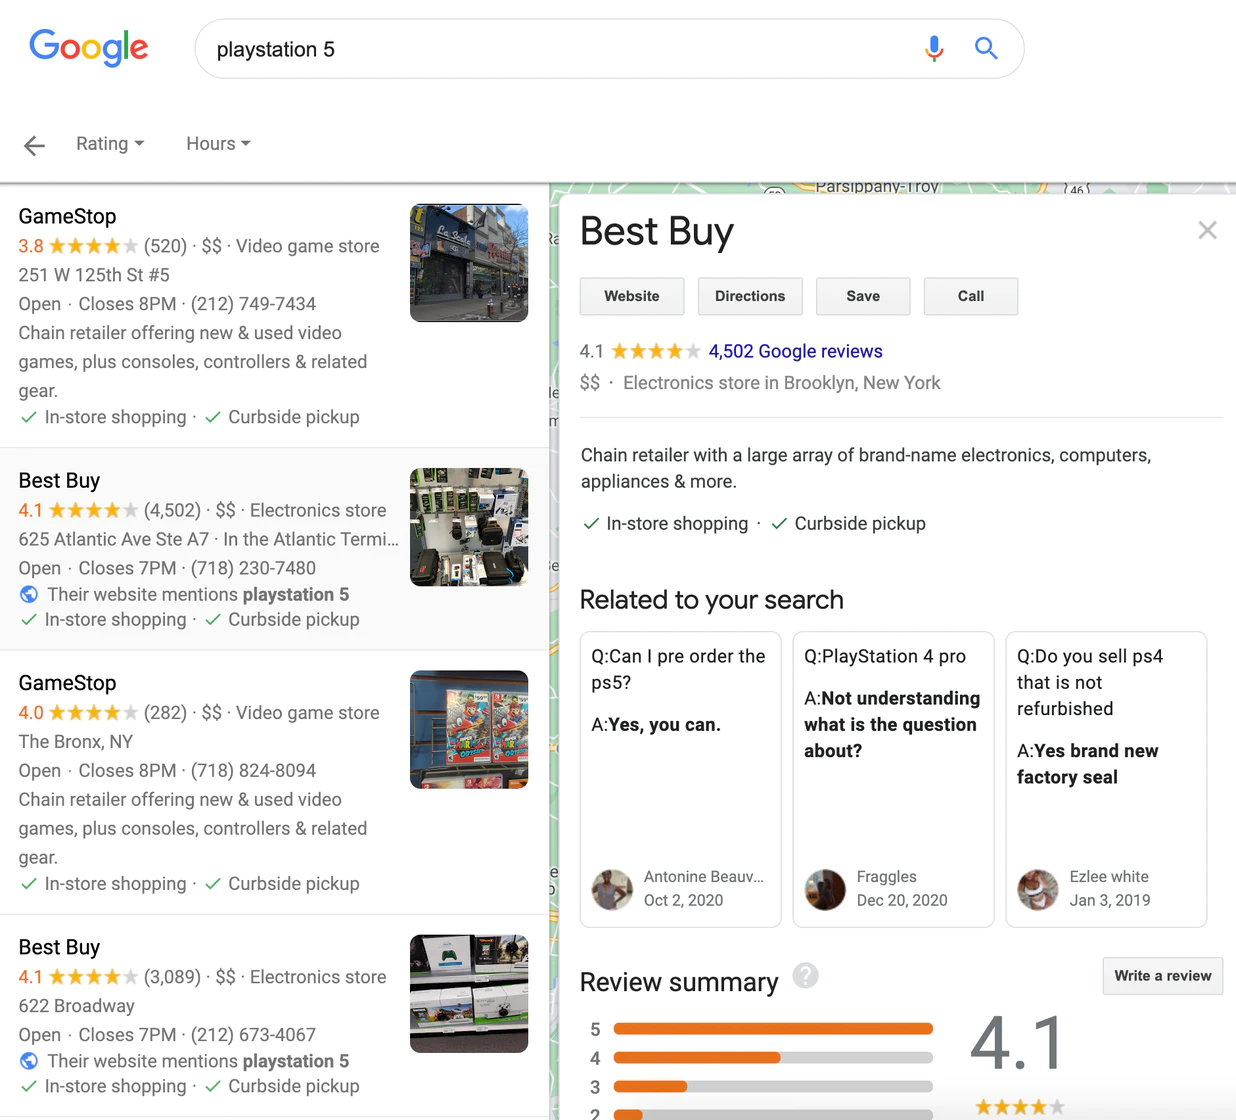 Google shows relevant local businesses